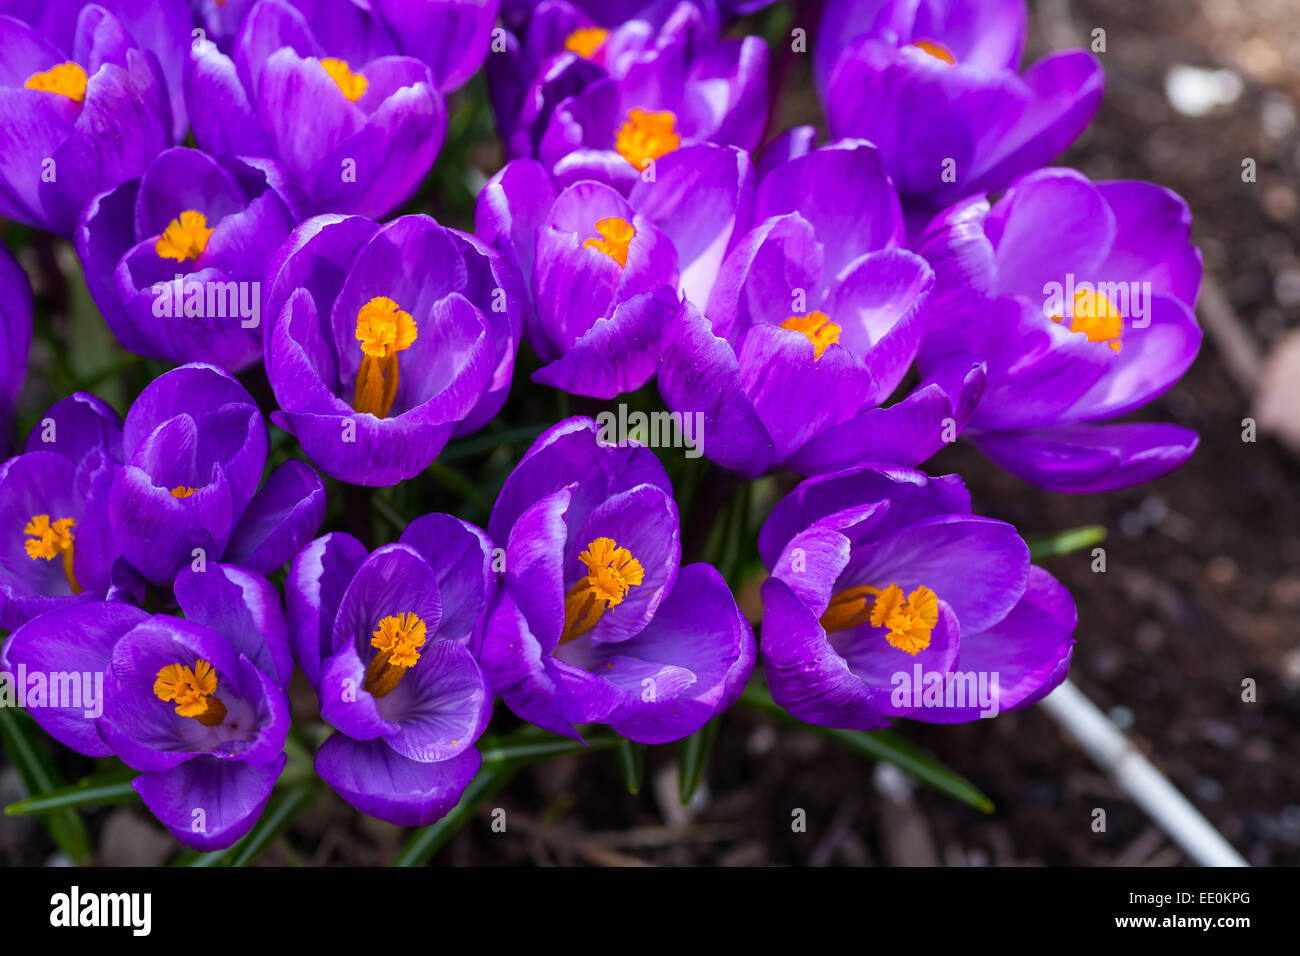 Crocus flowers in the early spring garden. Stock Photo